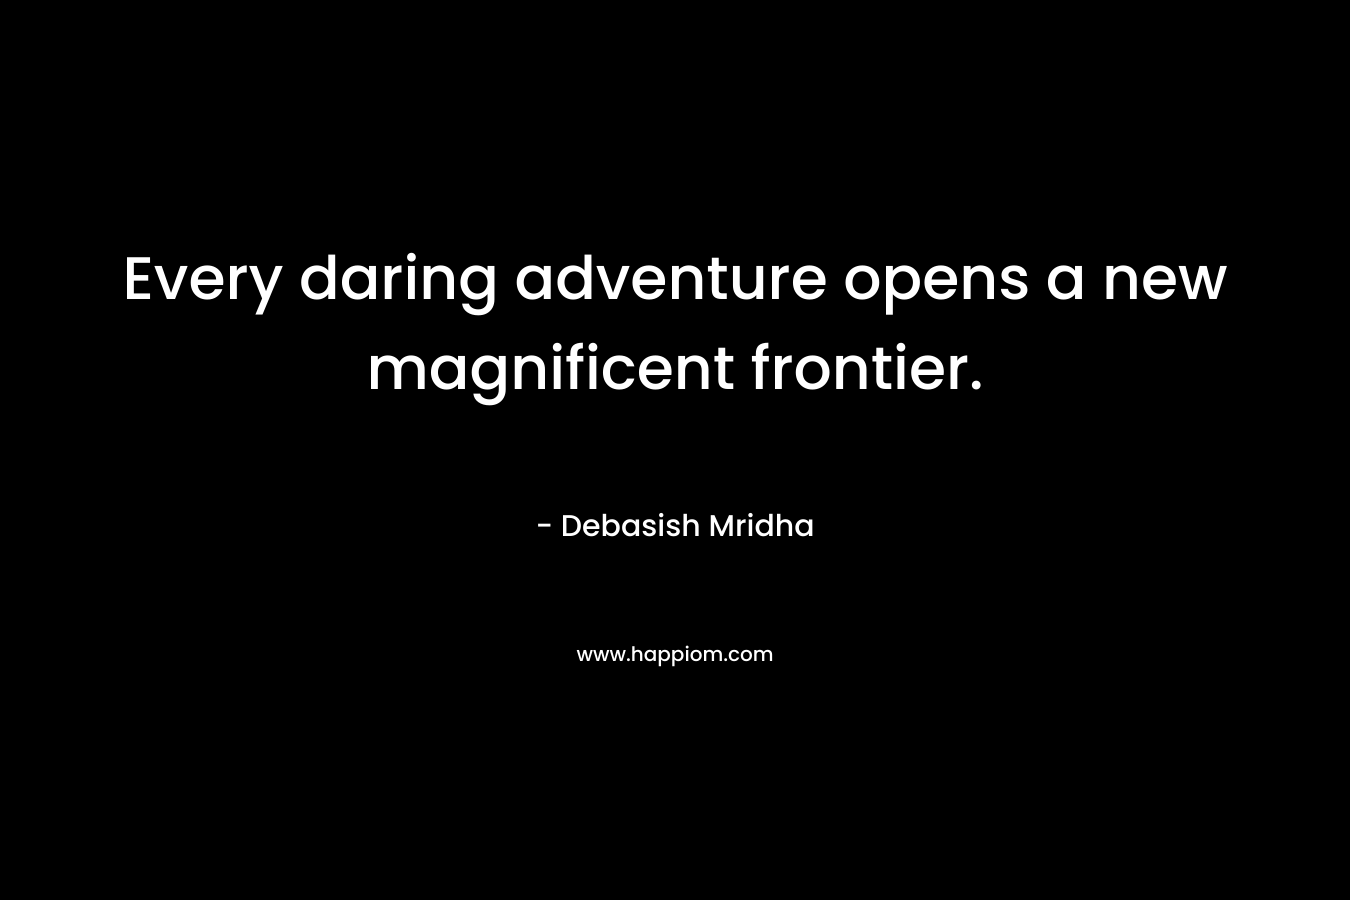 Every daring adventure opens a new magnificent frontier.